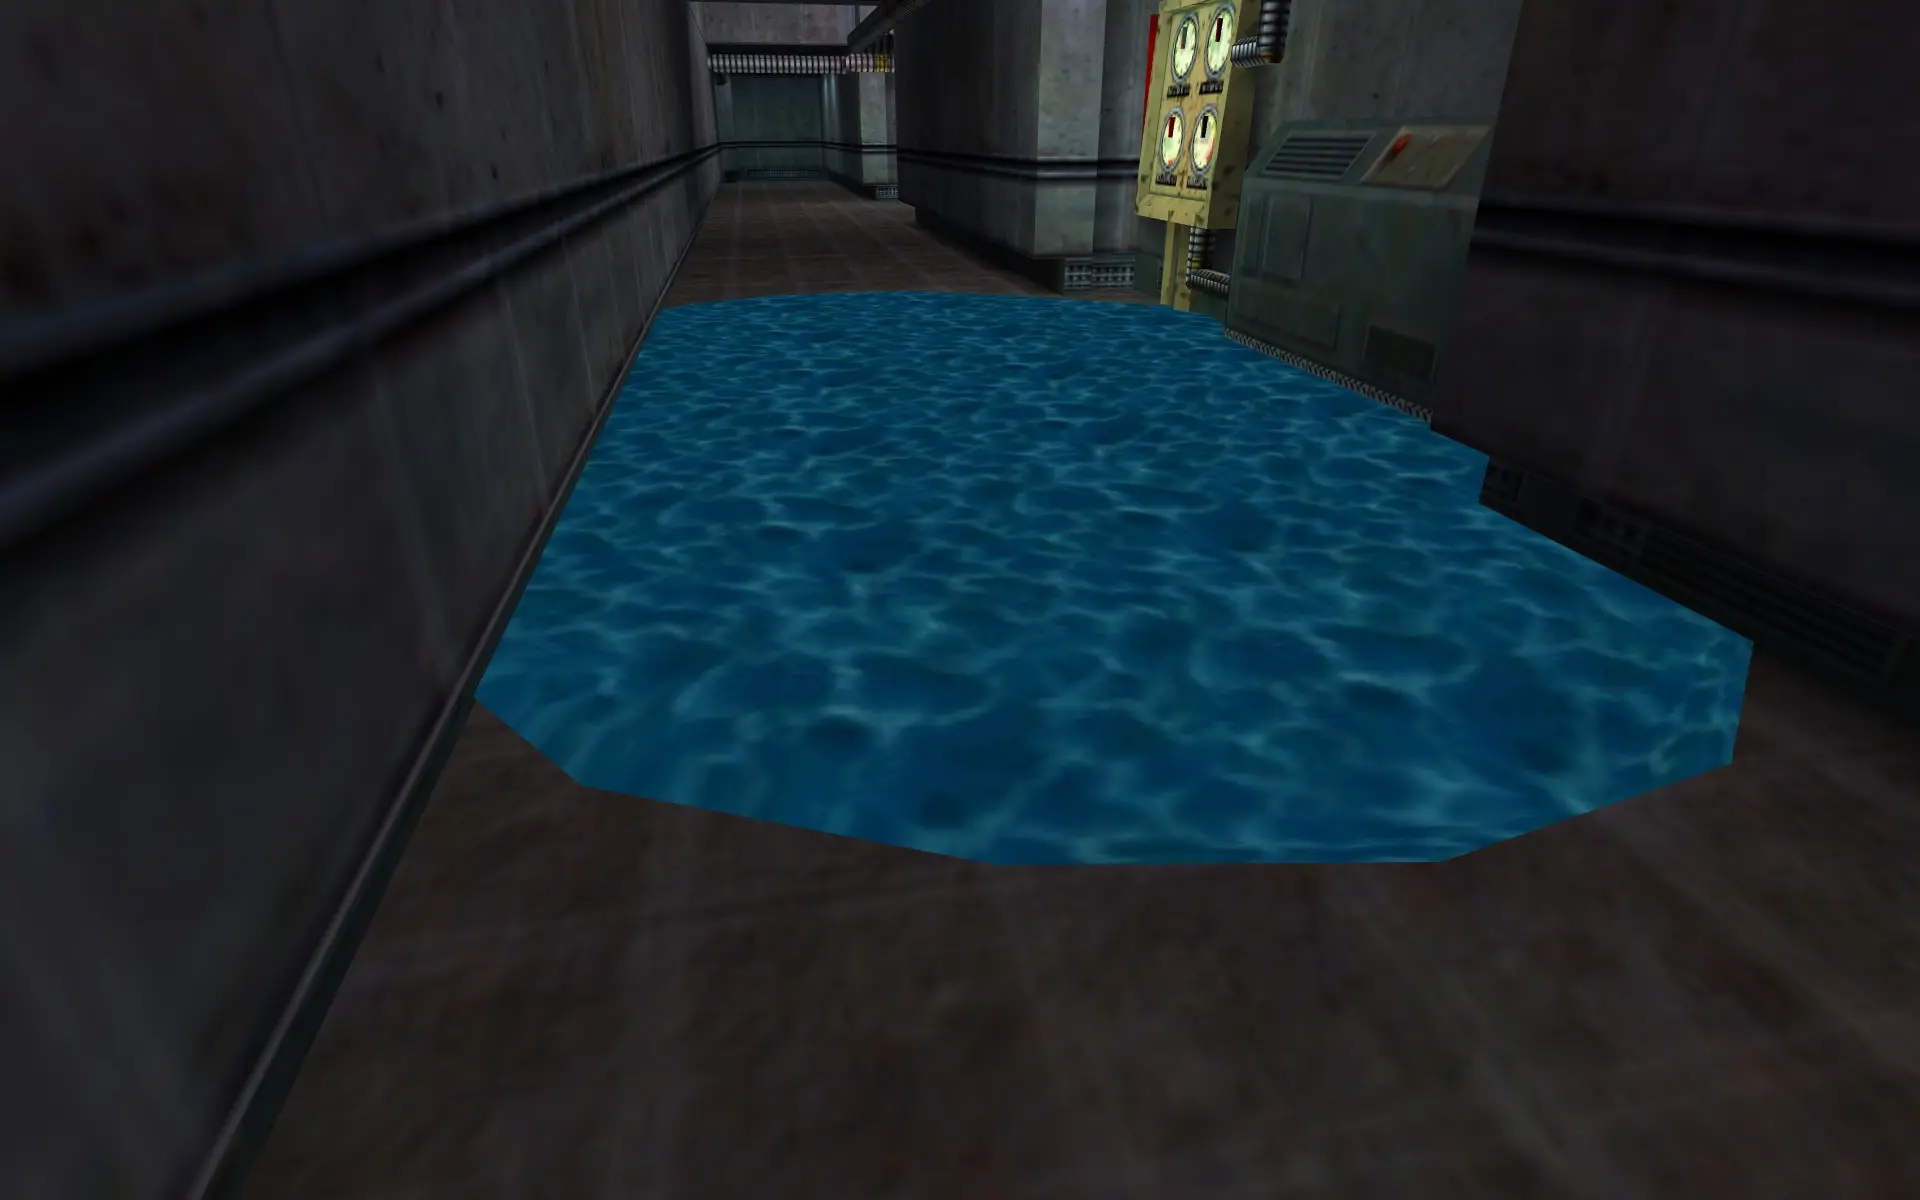 Screenshot from Half Life showing blue opaque water.